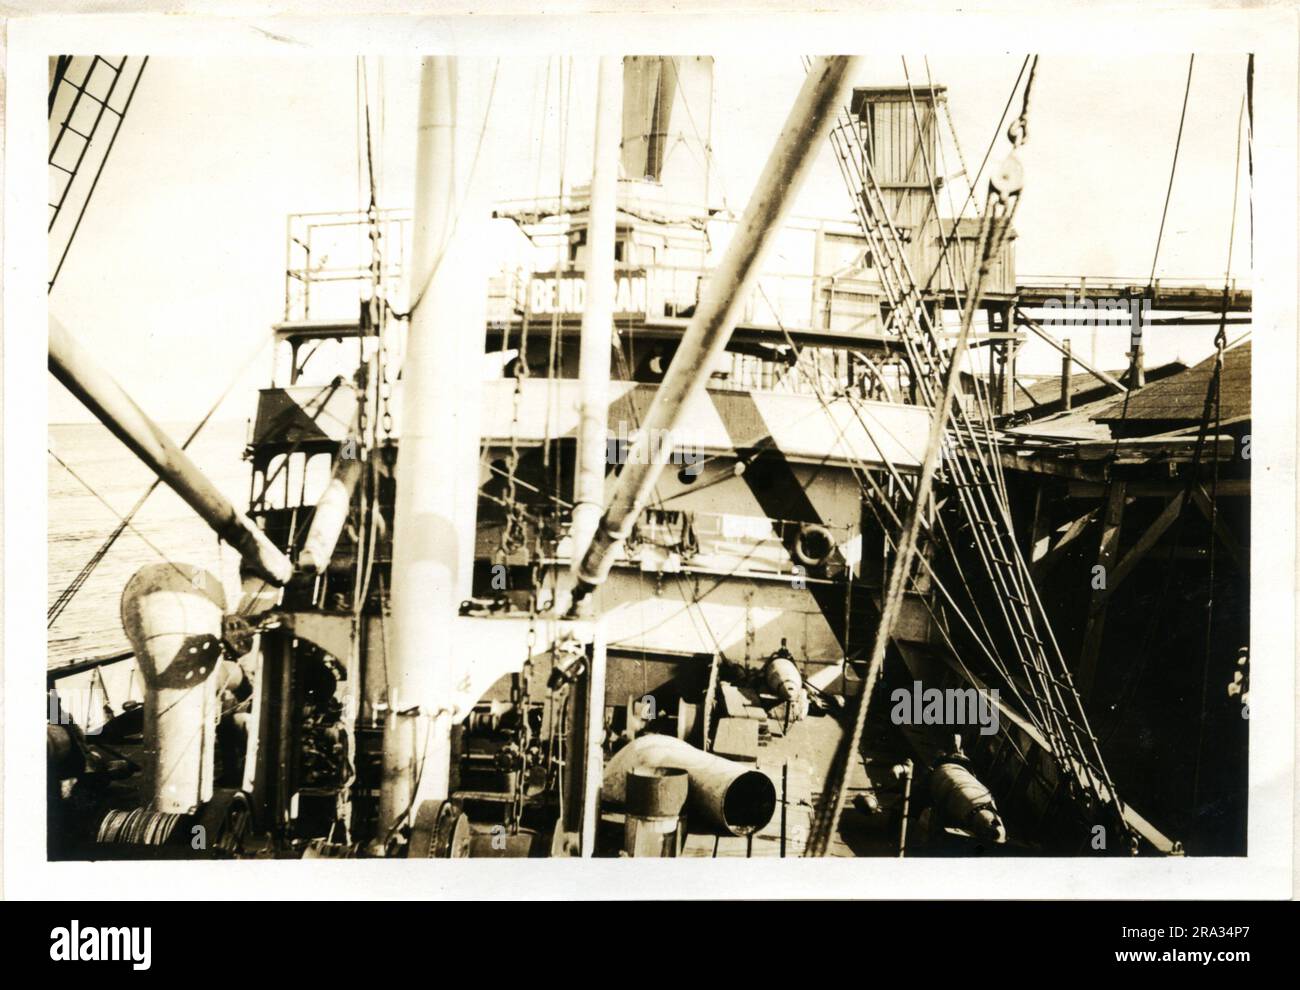 Photograph of the Fore Side of the Bridge of the SS Bendoran. Photograph Of Fore Side Bride. Date: - Oct. 20 1918. Photograph Of S. S. Bendoran. Nationality: -British. Tonnage: -4074. Captain: -D. T. Cadley. Owners: -Wm. Thomson & Co. Leith, Scotland. Where From: - Huelva, Spain. Destination: Brunswick GA. & Liverpool, Eng. Where Photographed: Charleston S. C. Sixth Naval District. By Whom: J.B. Dearborn. Date: Sept. 5th. 1918. Where Camouflaged: Liverpool Eng. Date: Feb. 1918. By Whom: Wilson & Co. By Orders Of The British Goverment Government. Type Of Ship: Well Deck. Length 380ft. Beam 46 f Stock Photo